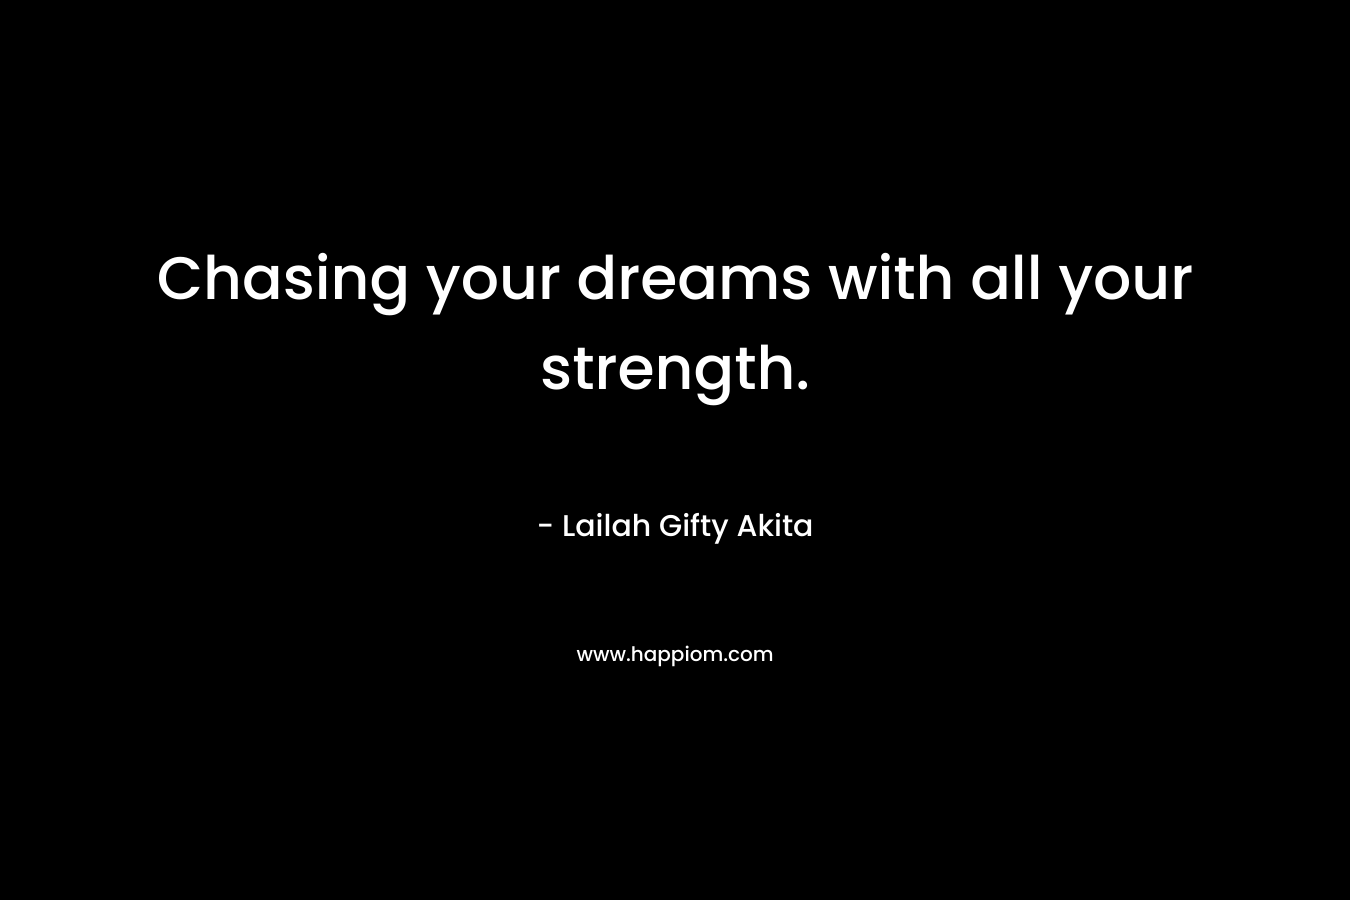 Chasing your dreams with all your strength.